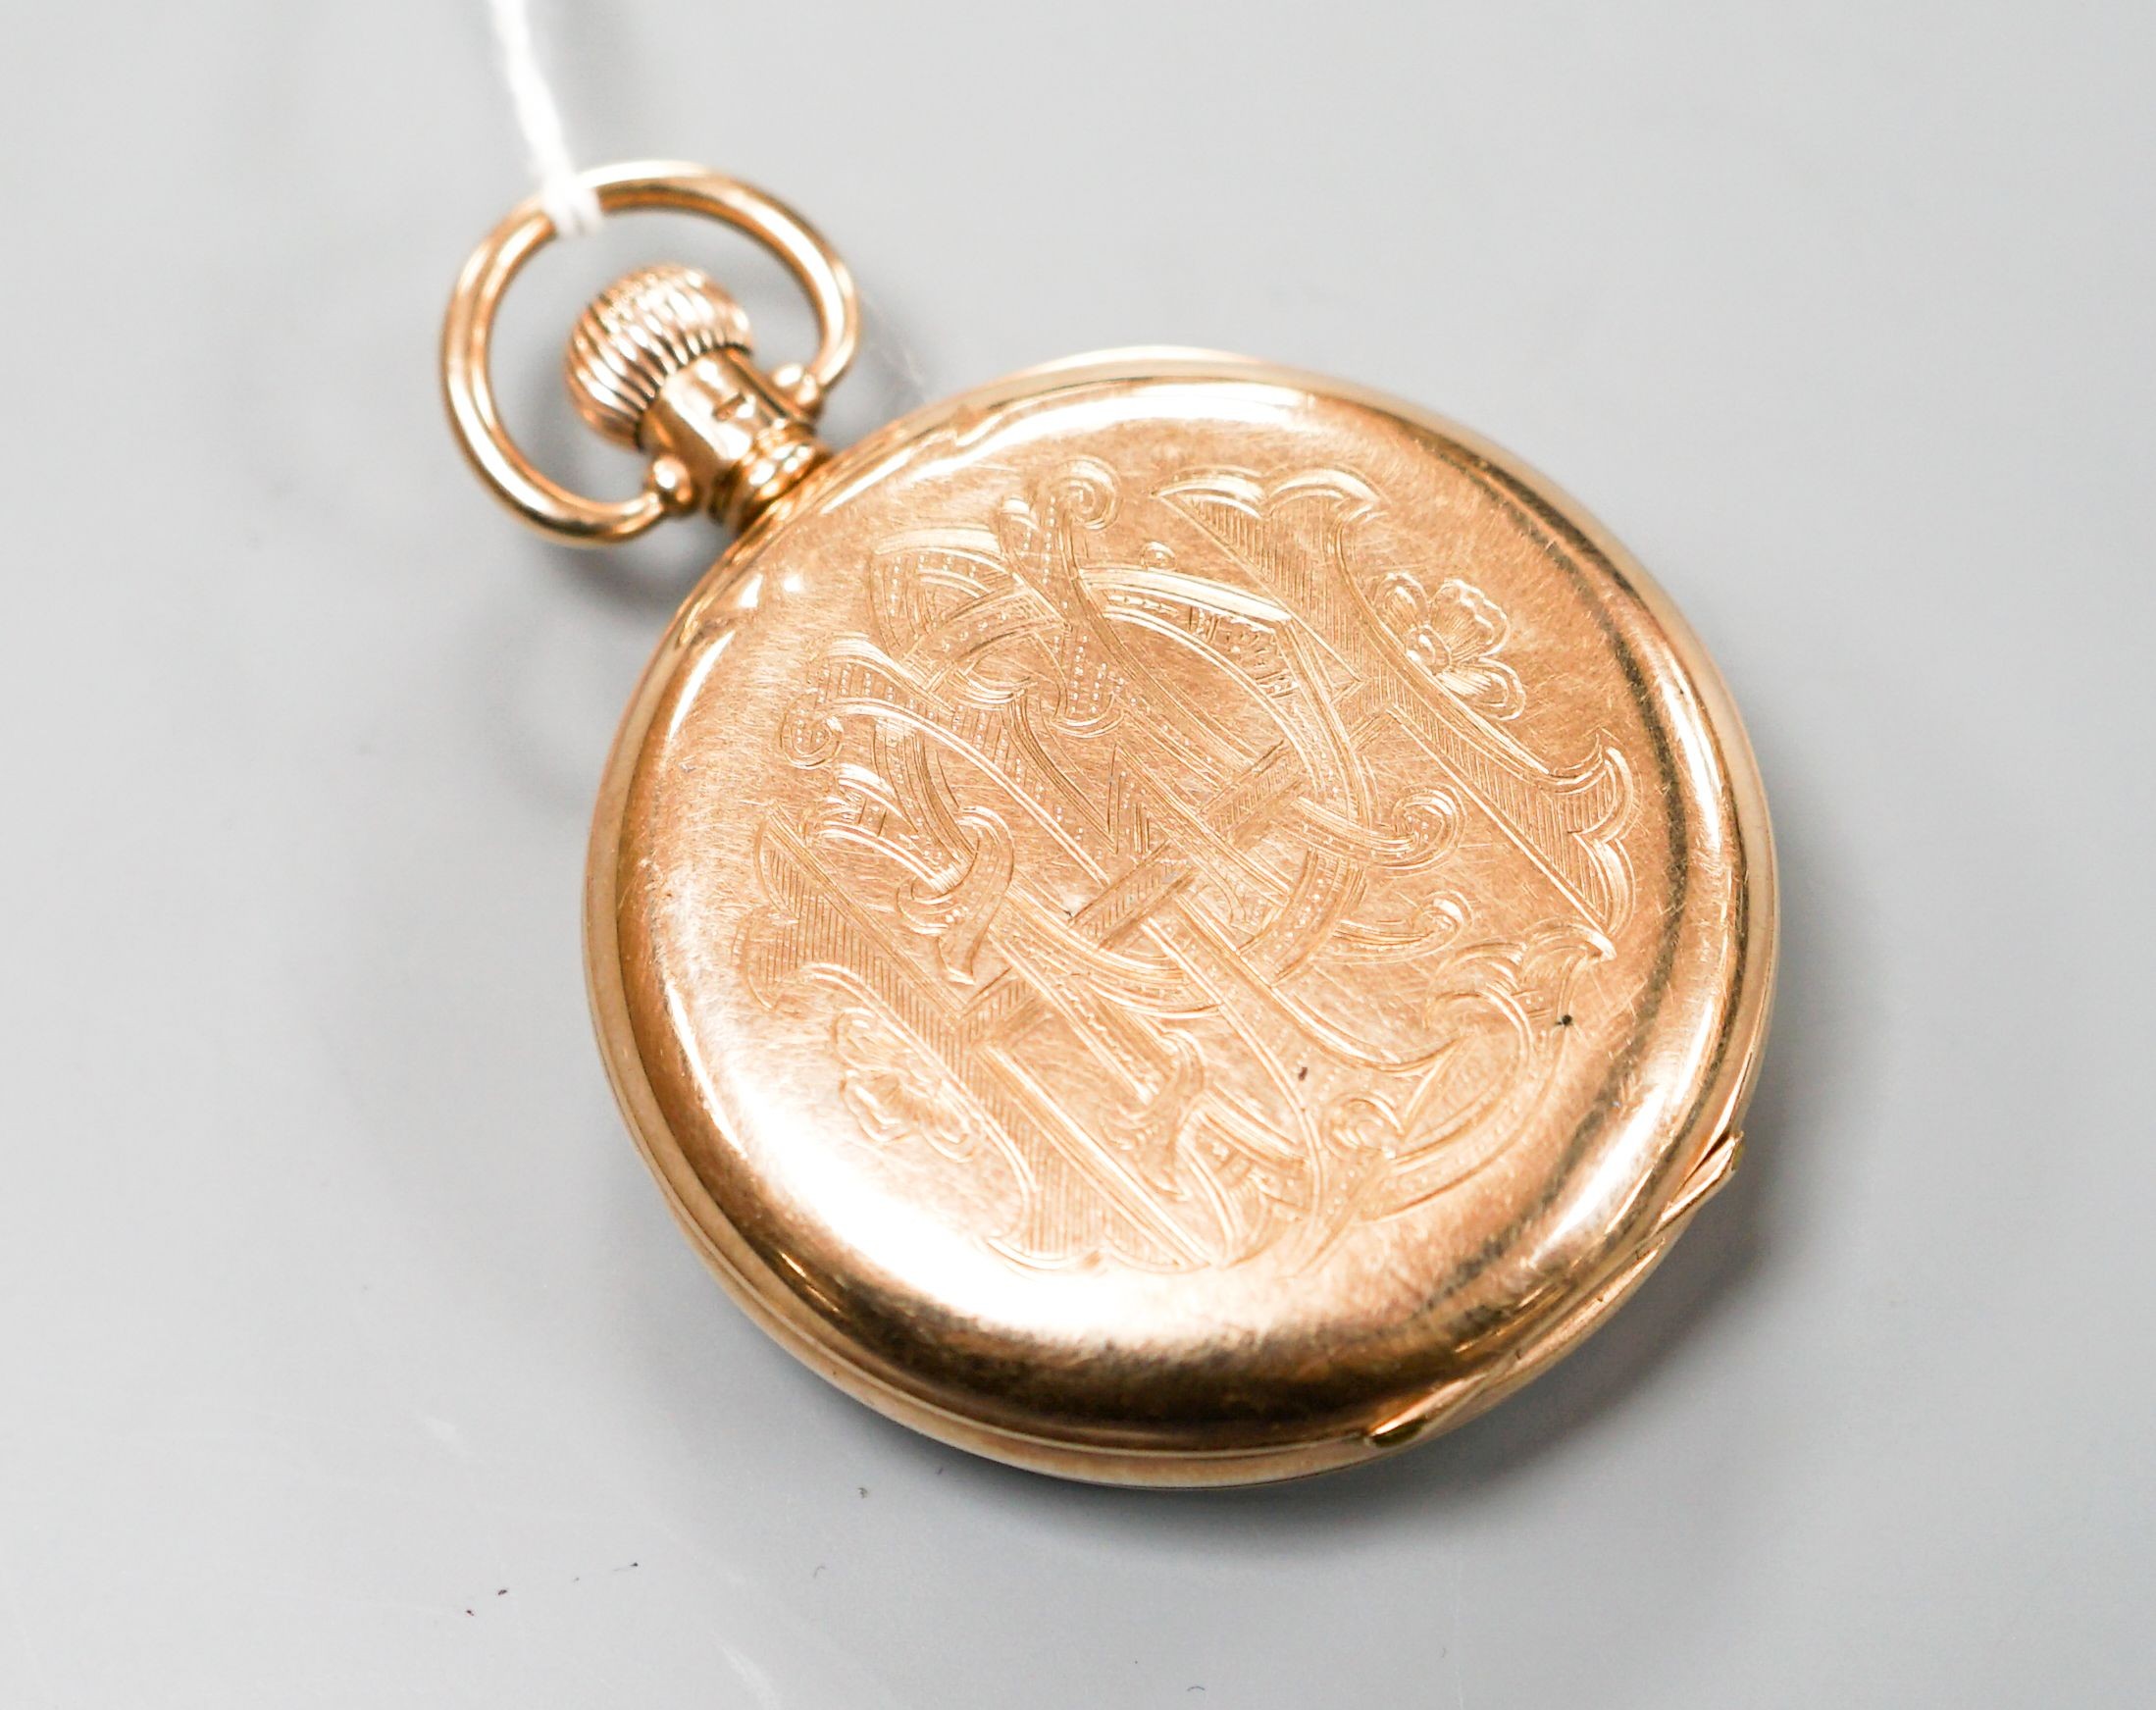 A 9ct gold open face Waltham keyless pocket watch, with engraved monogram, case diameter 50mm, gross weight 83.2 grams.